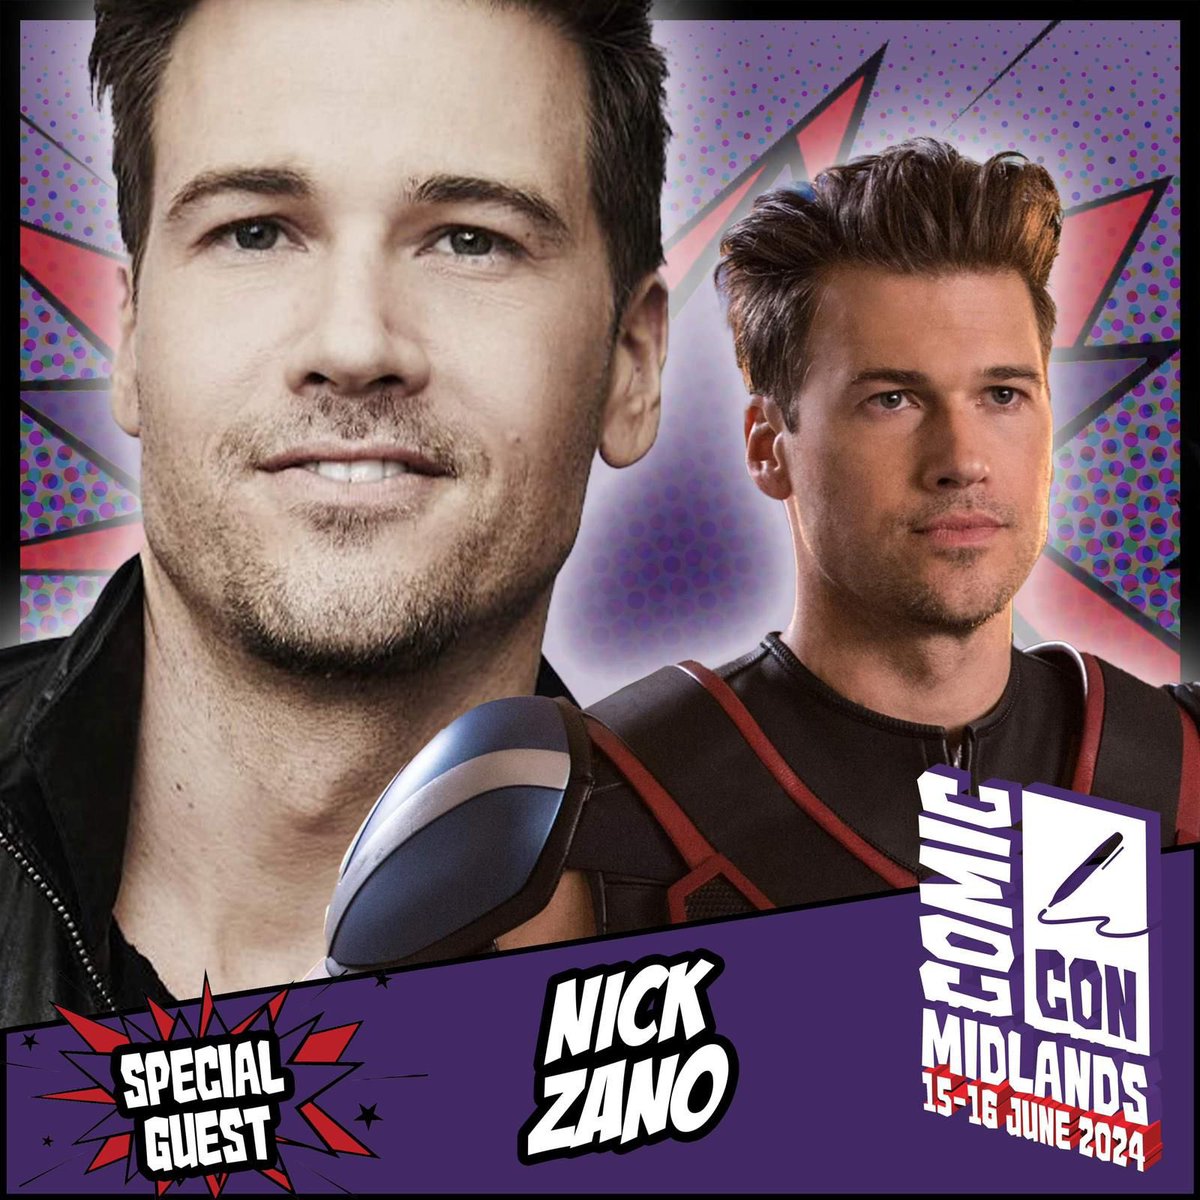 Comic Con Midlands welcomes Nick Zano, known for projects such as Legends of Tomorrow, Obliterated, Minority Report, Final Destination, and many more. Appearing 15-16 June! Tickets: comicconventionmidlands.co.uk